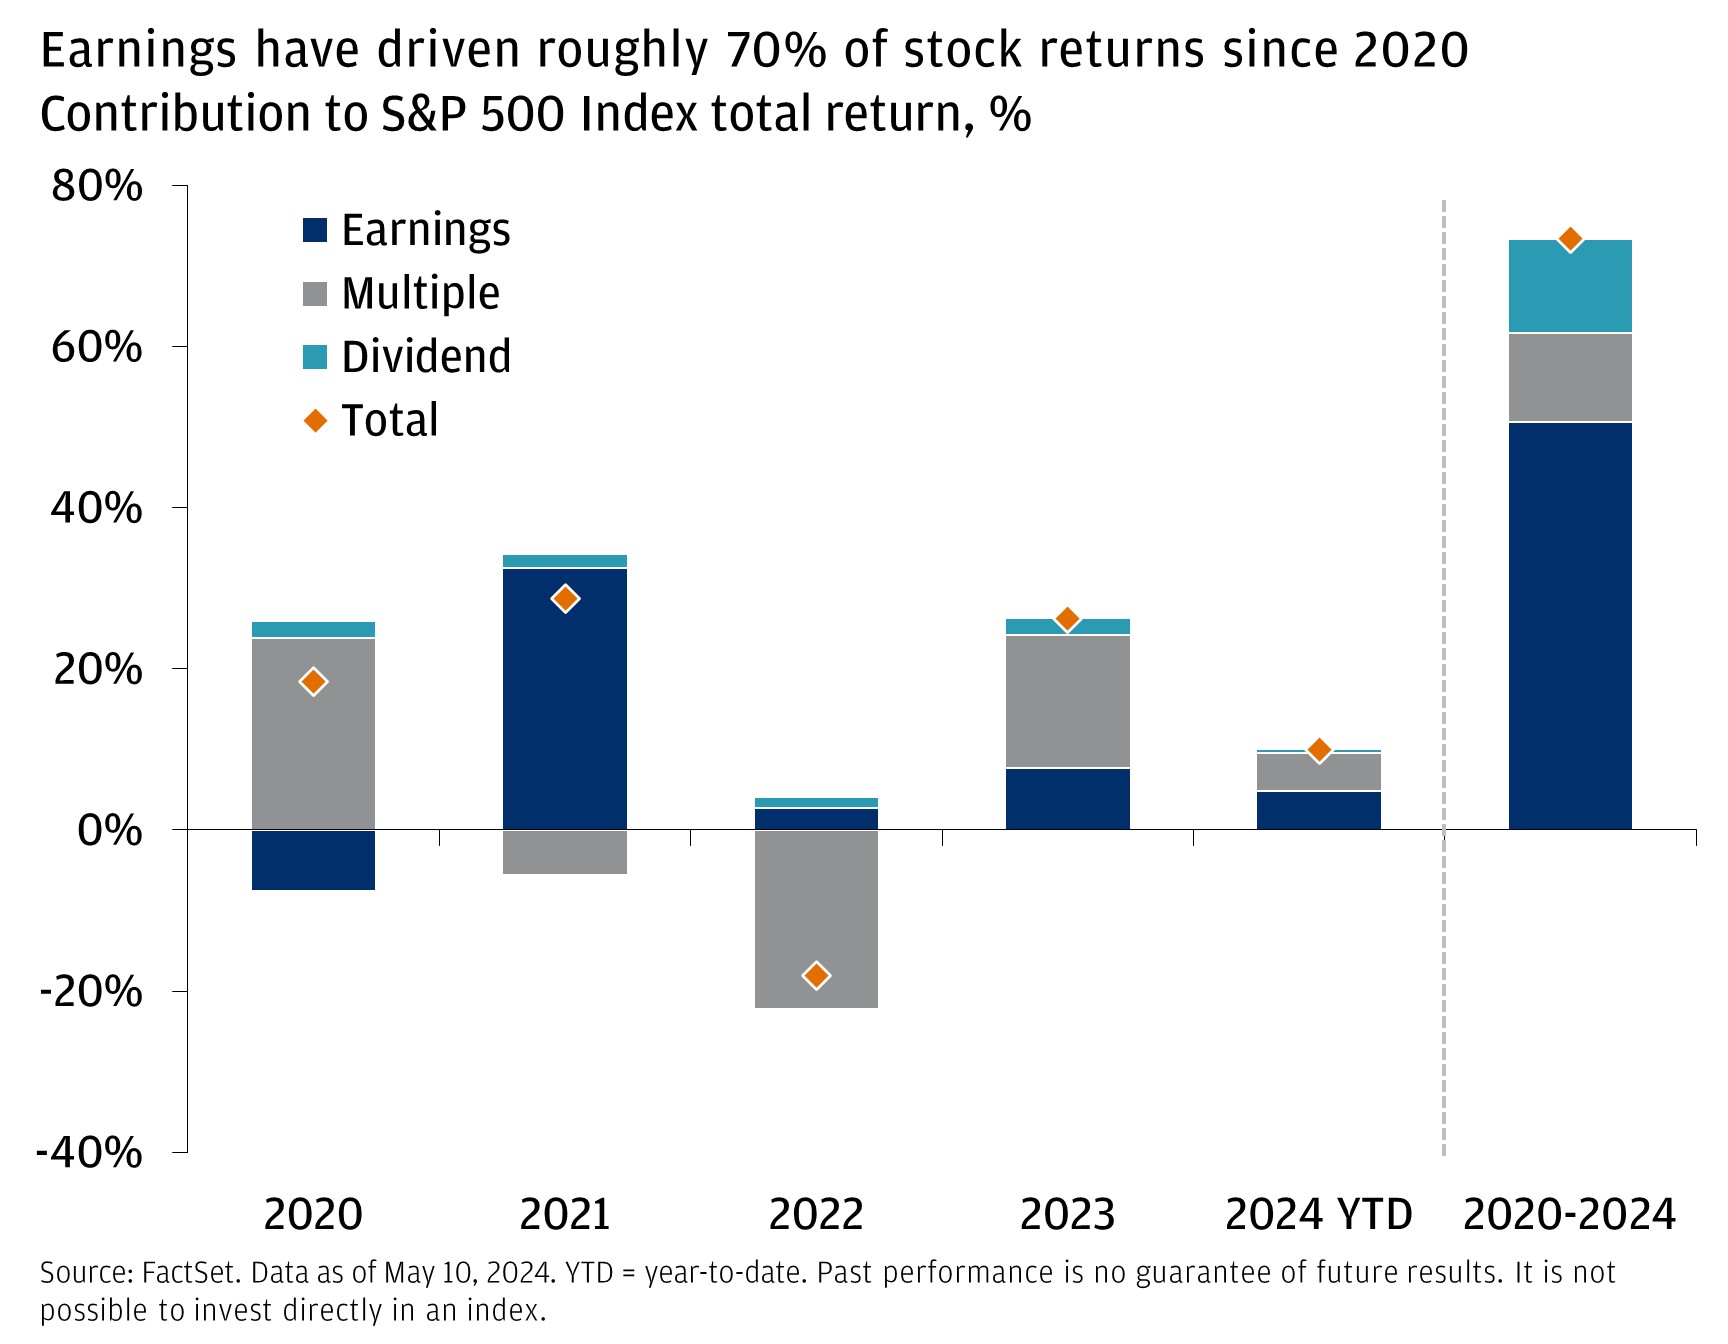 Earnings have driven roughly 70% of stock returns since 2020